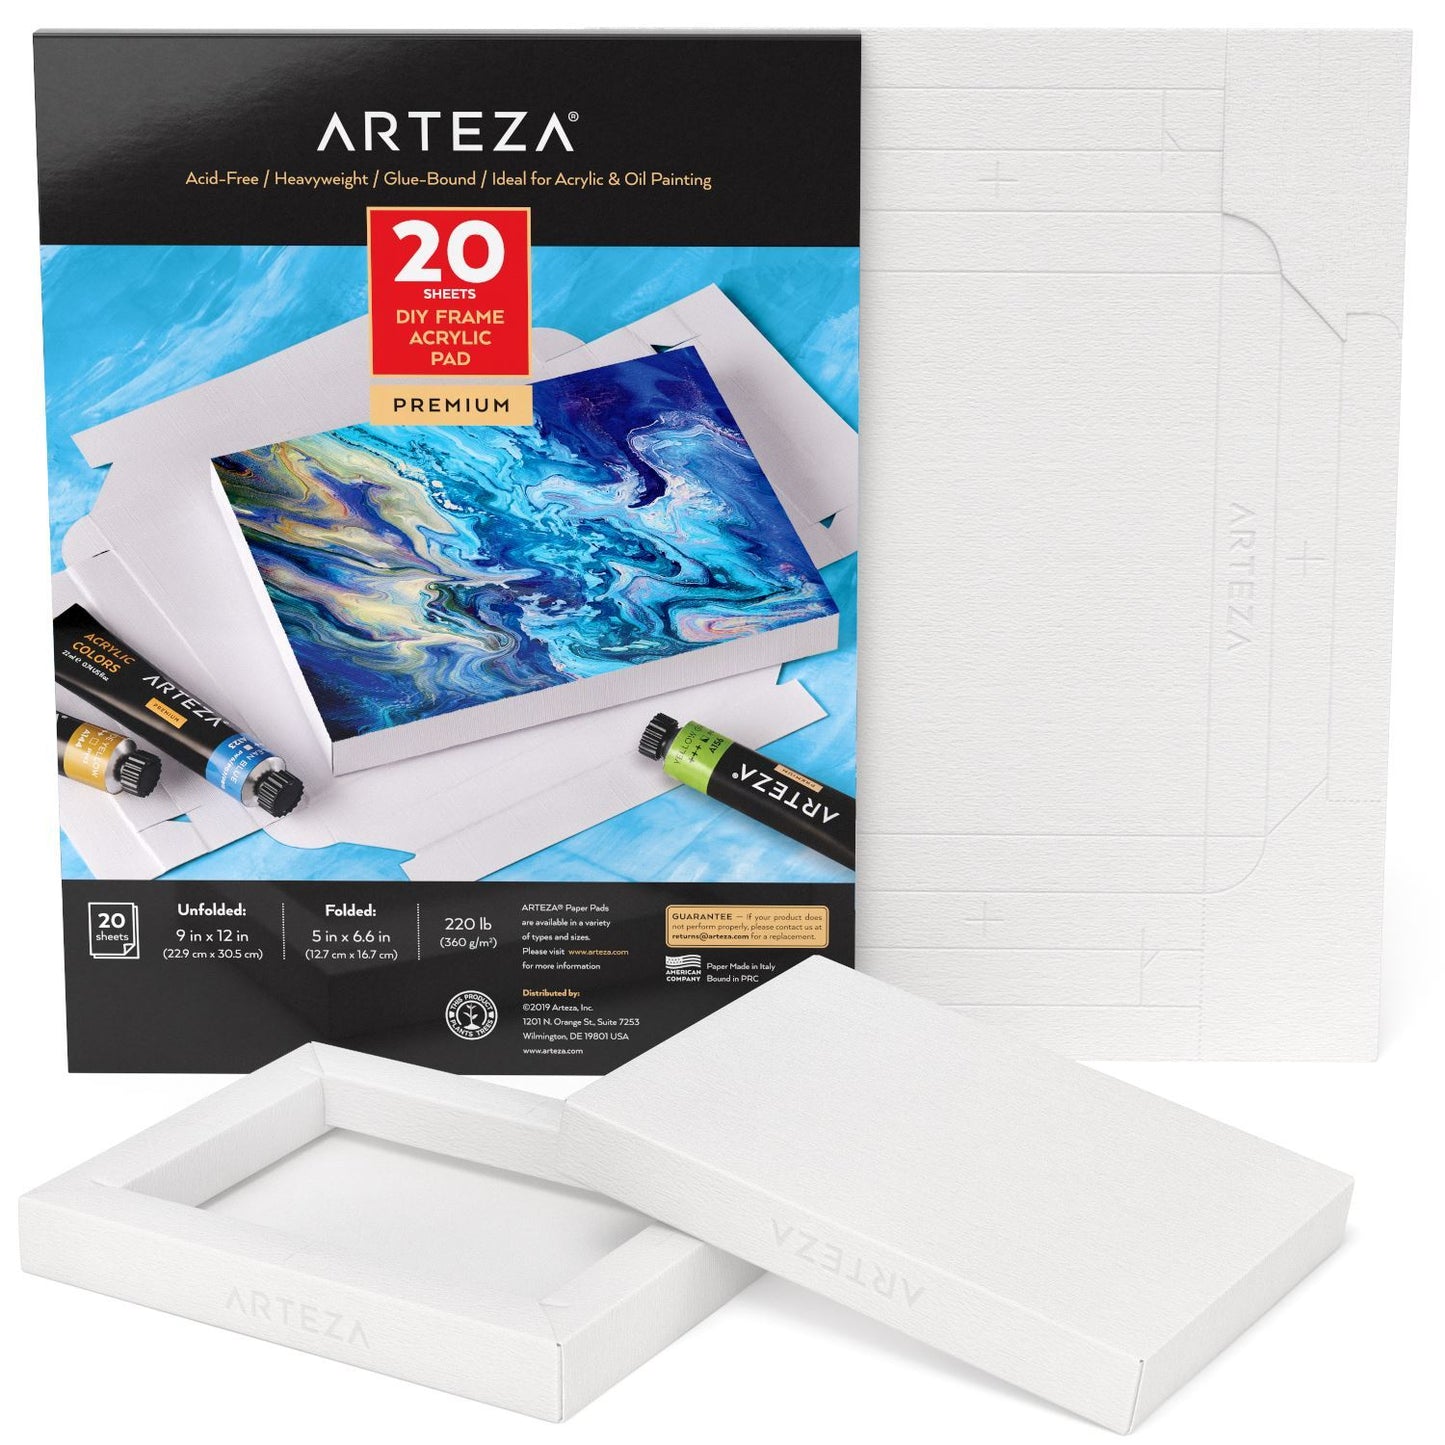 Arteza Acrylic Paper Foldable Canvas Pad, 8x11 Inches, 20 Sheets, DIY  Frame, Heavyweight Acrylic Paint Paper, 220 lb, 360 GSM, Acid-Free, Art  Supplies for Painting & Mixed Media Art - Yahoo Shopping